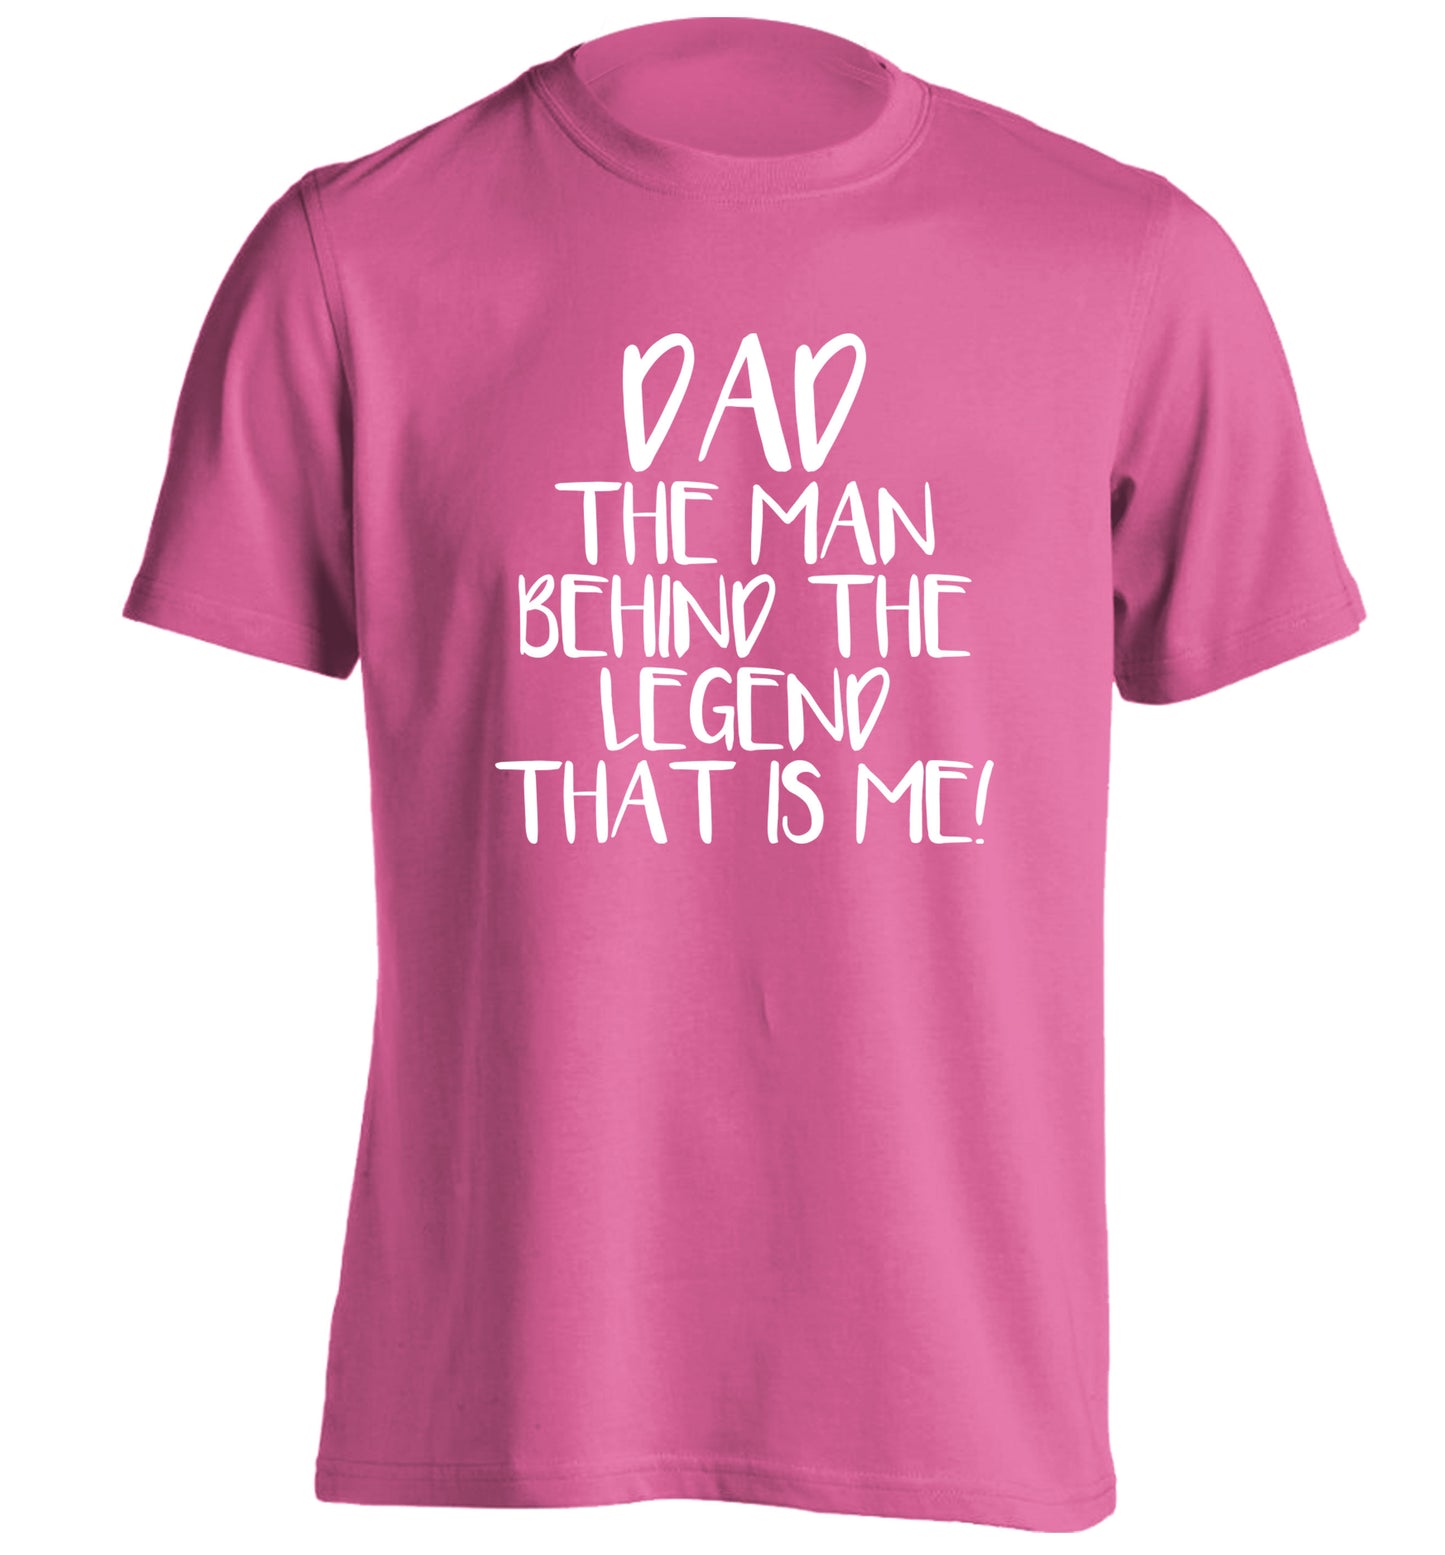 Dad the man behind the legend that is me! adults unisex pink Tshirt 2XL